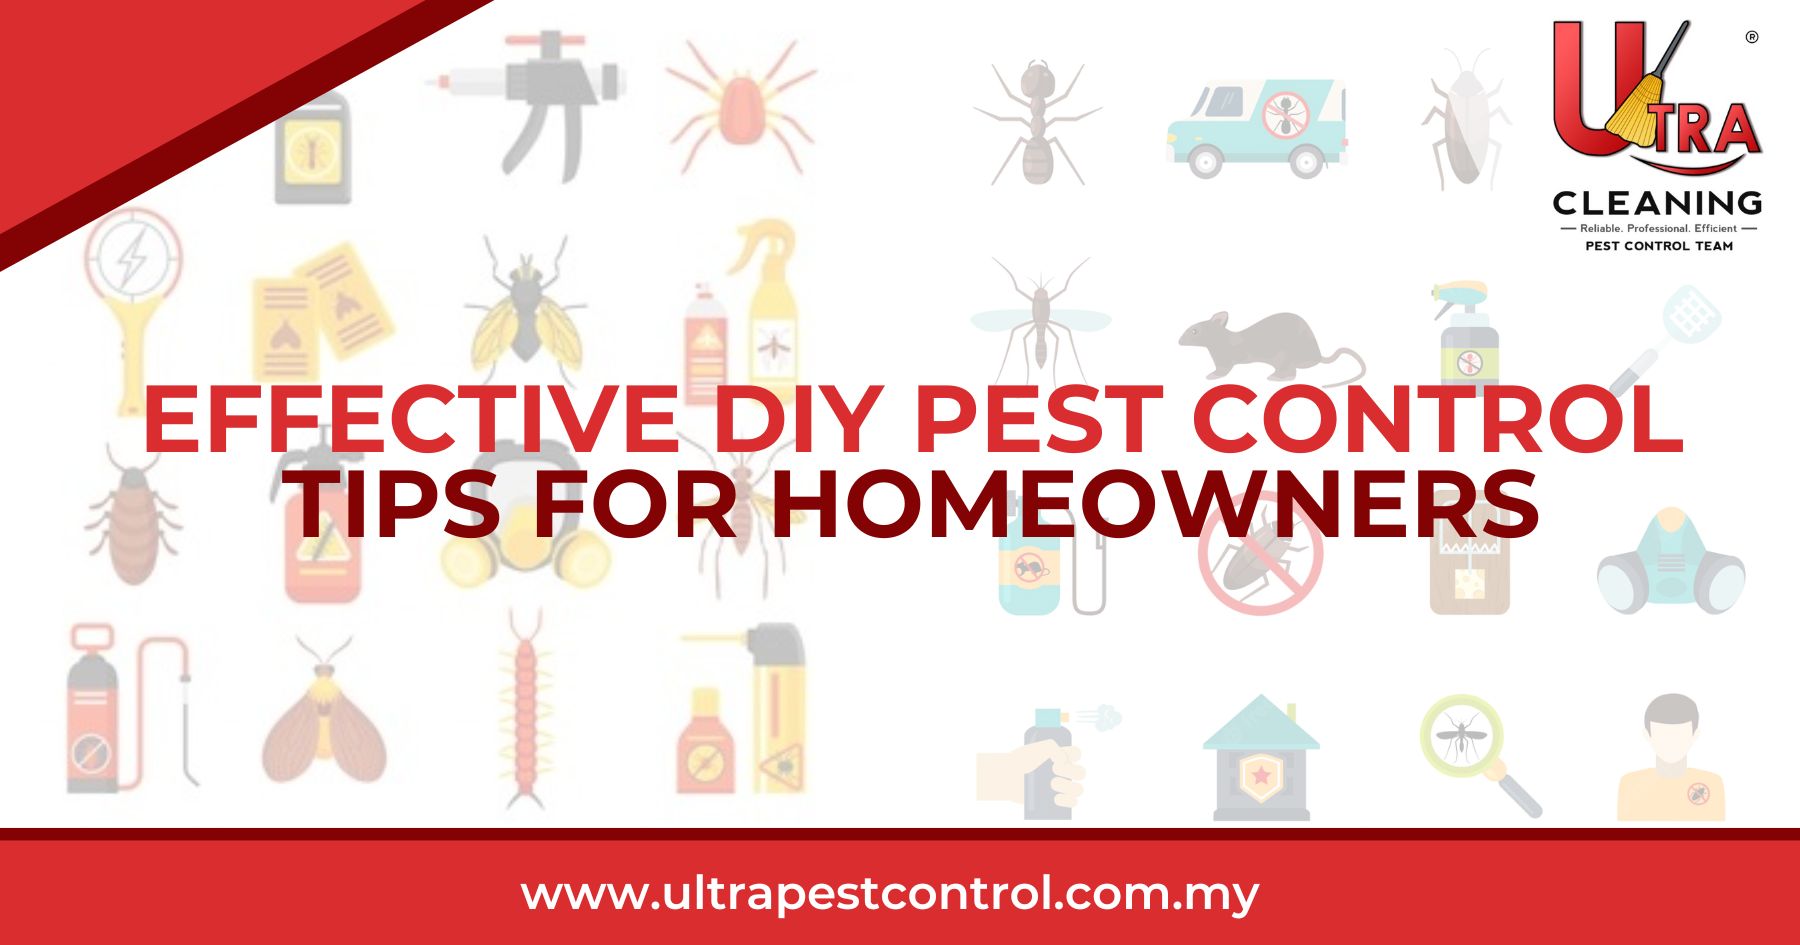 Effective DIY Pest Control Tips for Homeowners